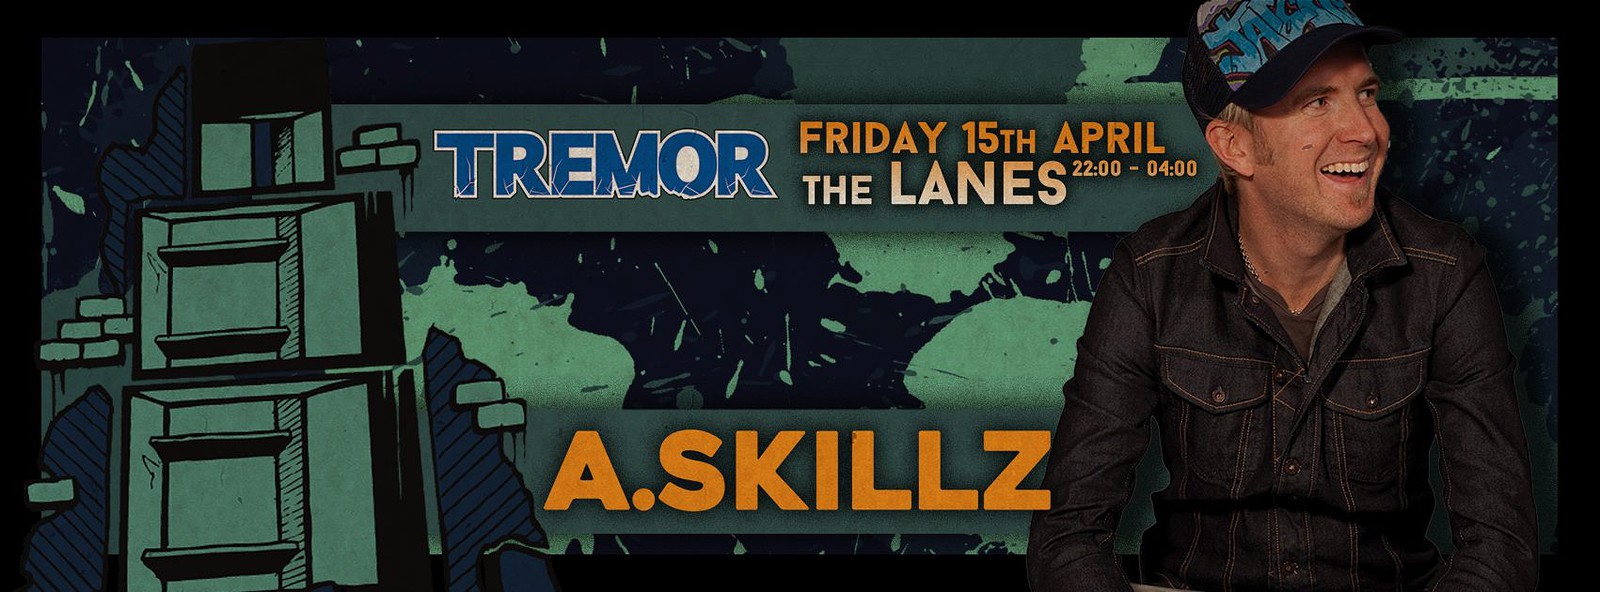 Tremor Presents A.skillz at The Lanes